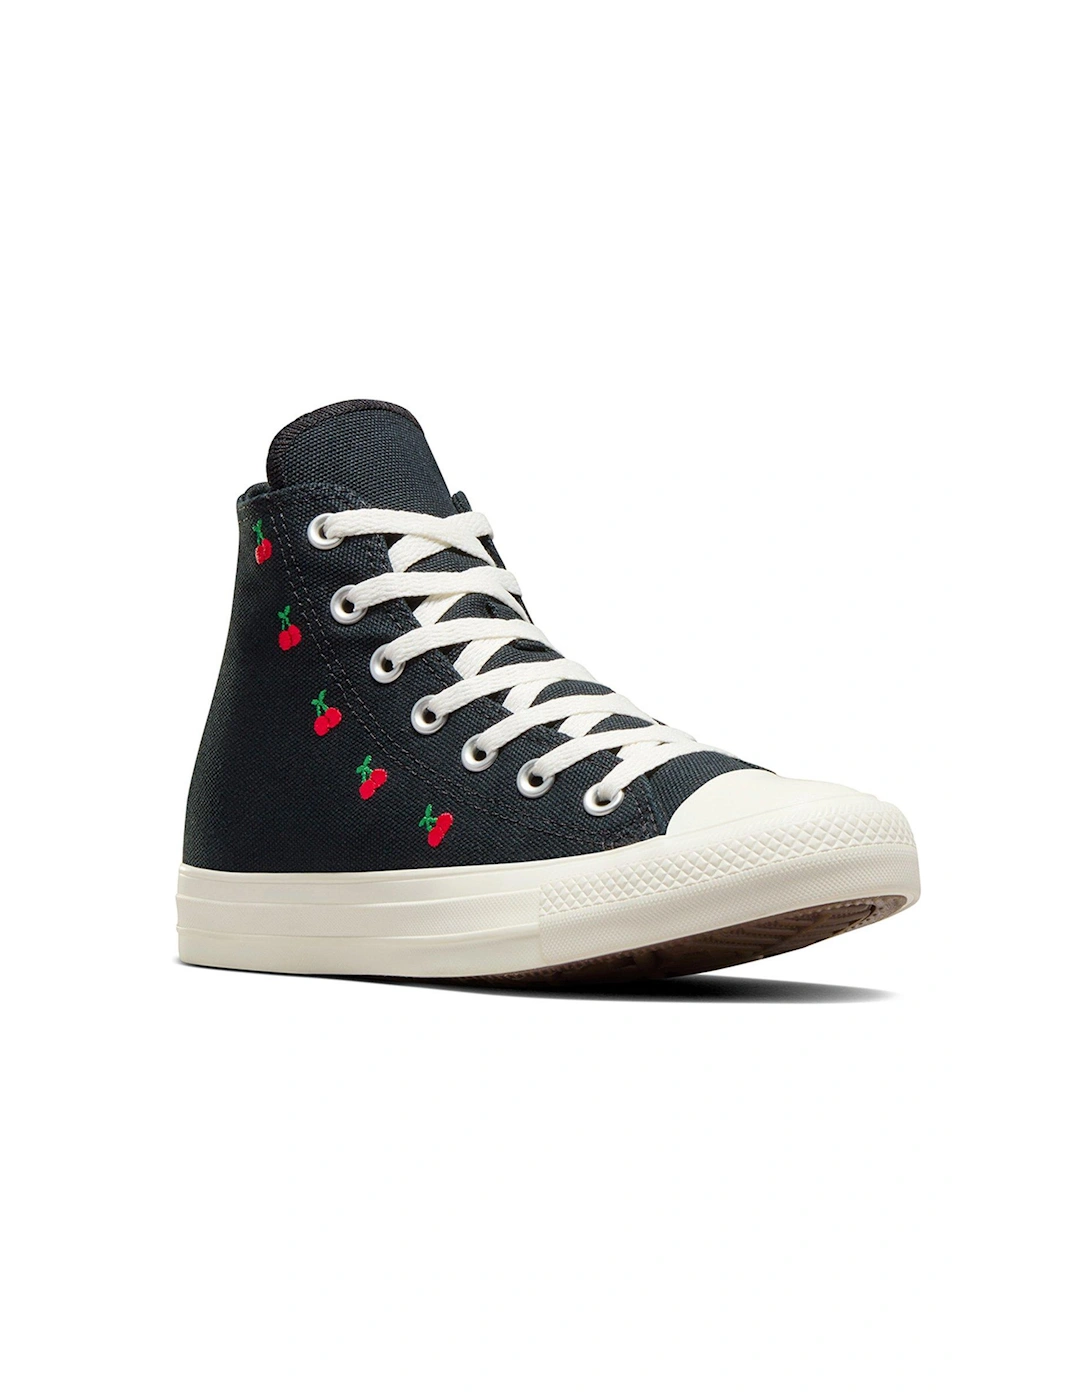 Womens Hi Top Trainers - Black/Red